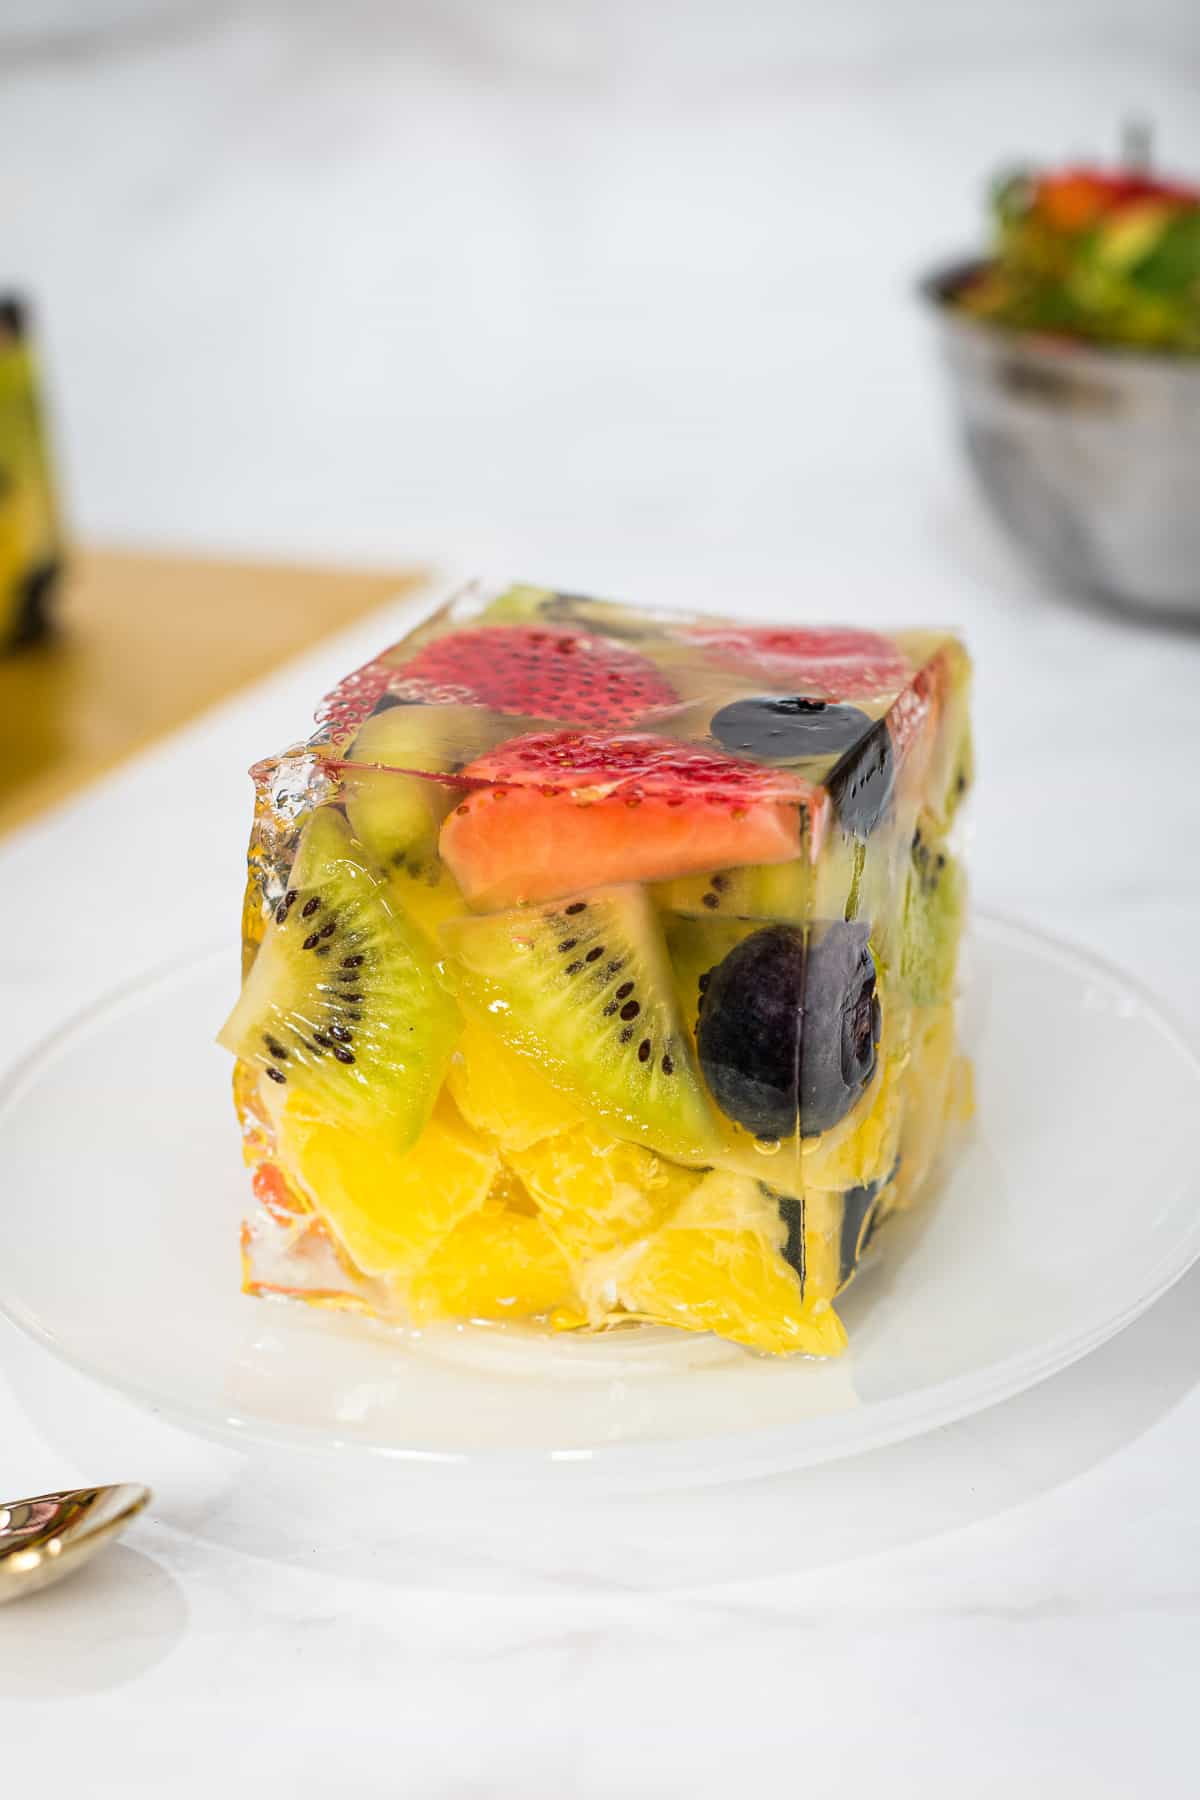 A slice of fruit jelly cake on a white plate.